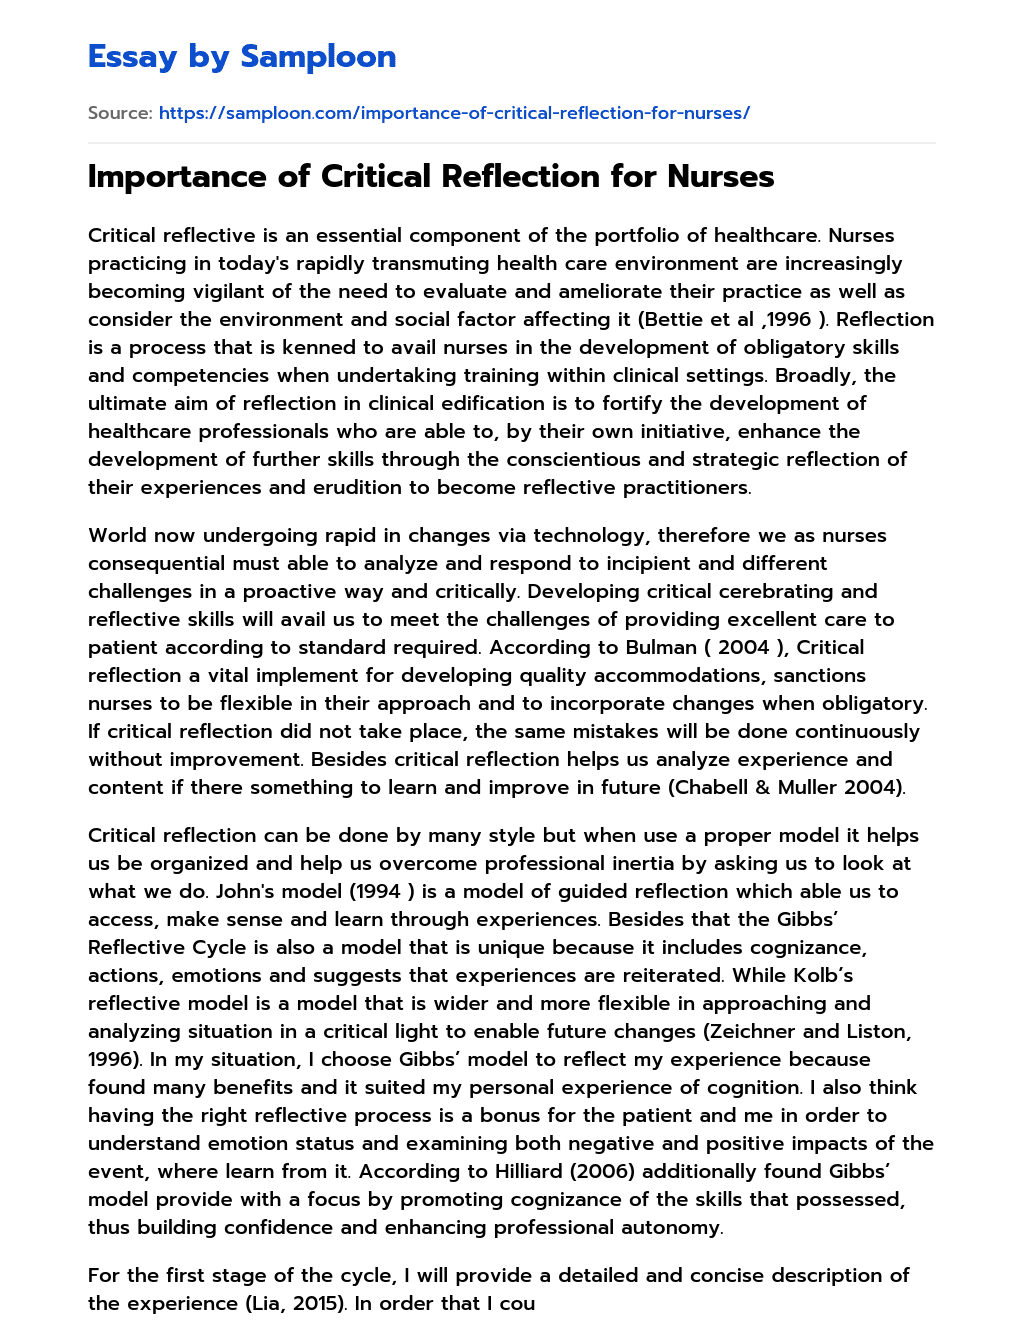 Importance of Critical Reflection for Nurses essay